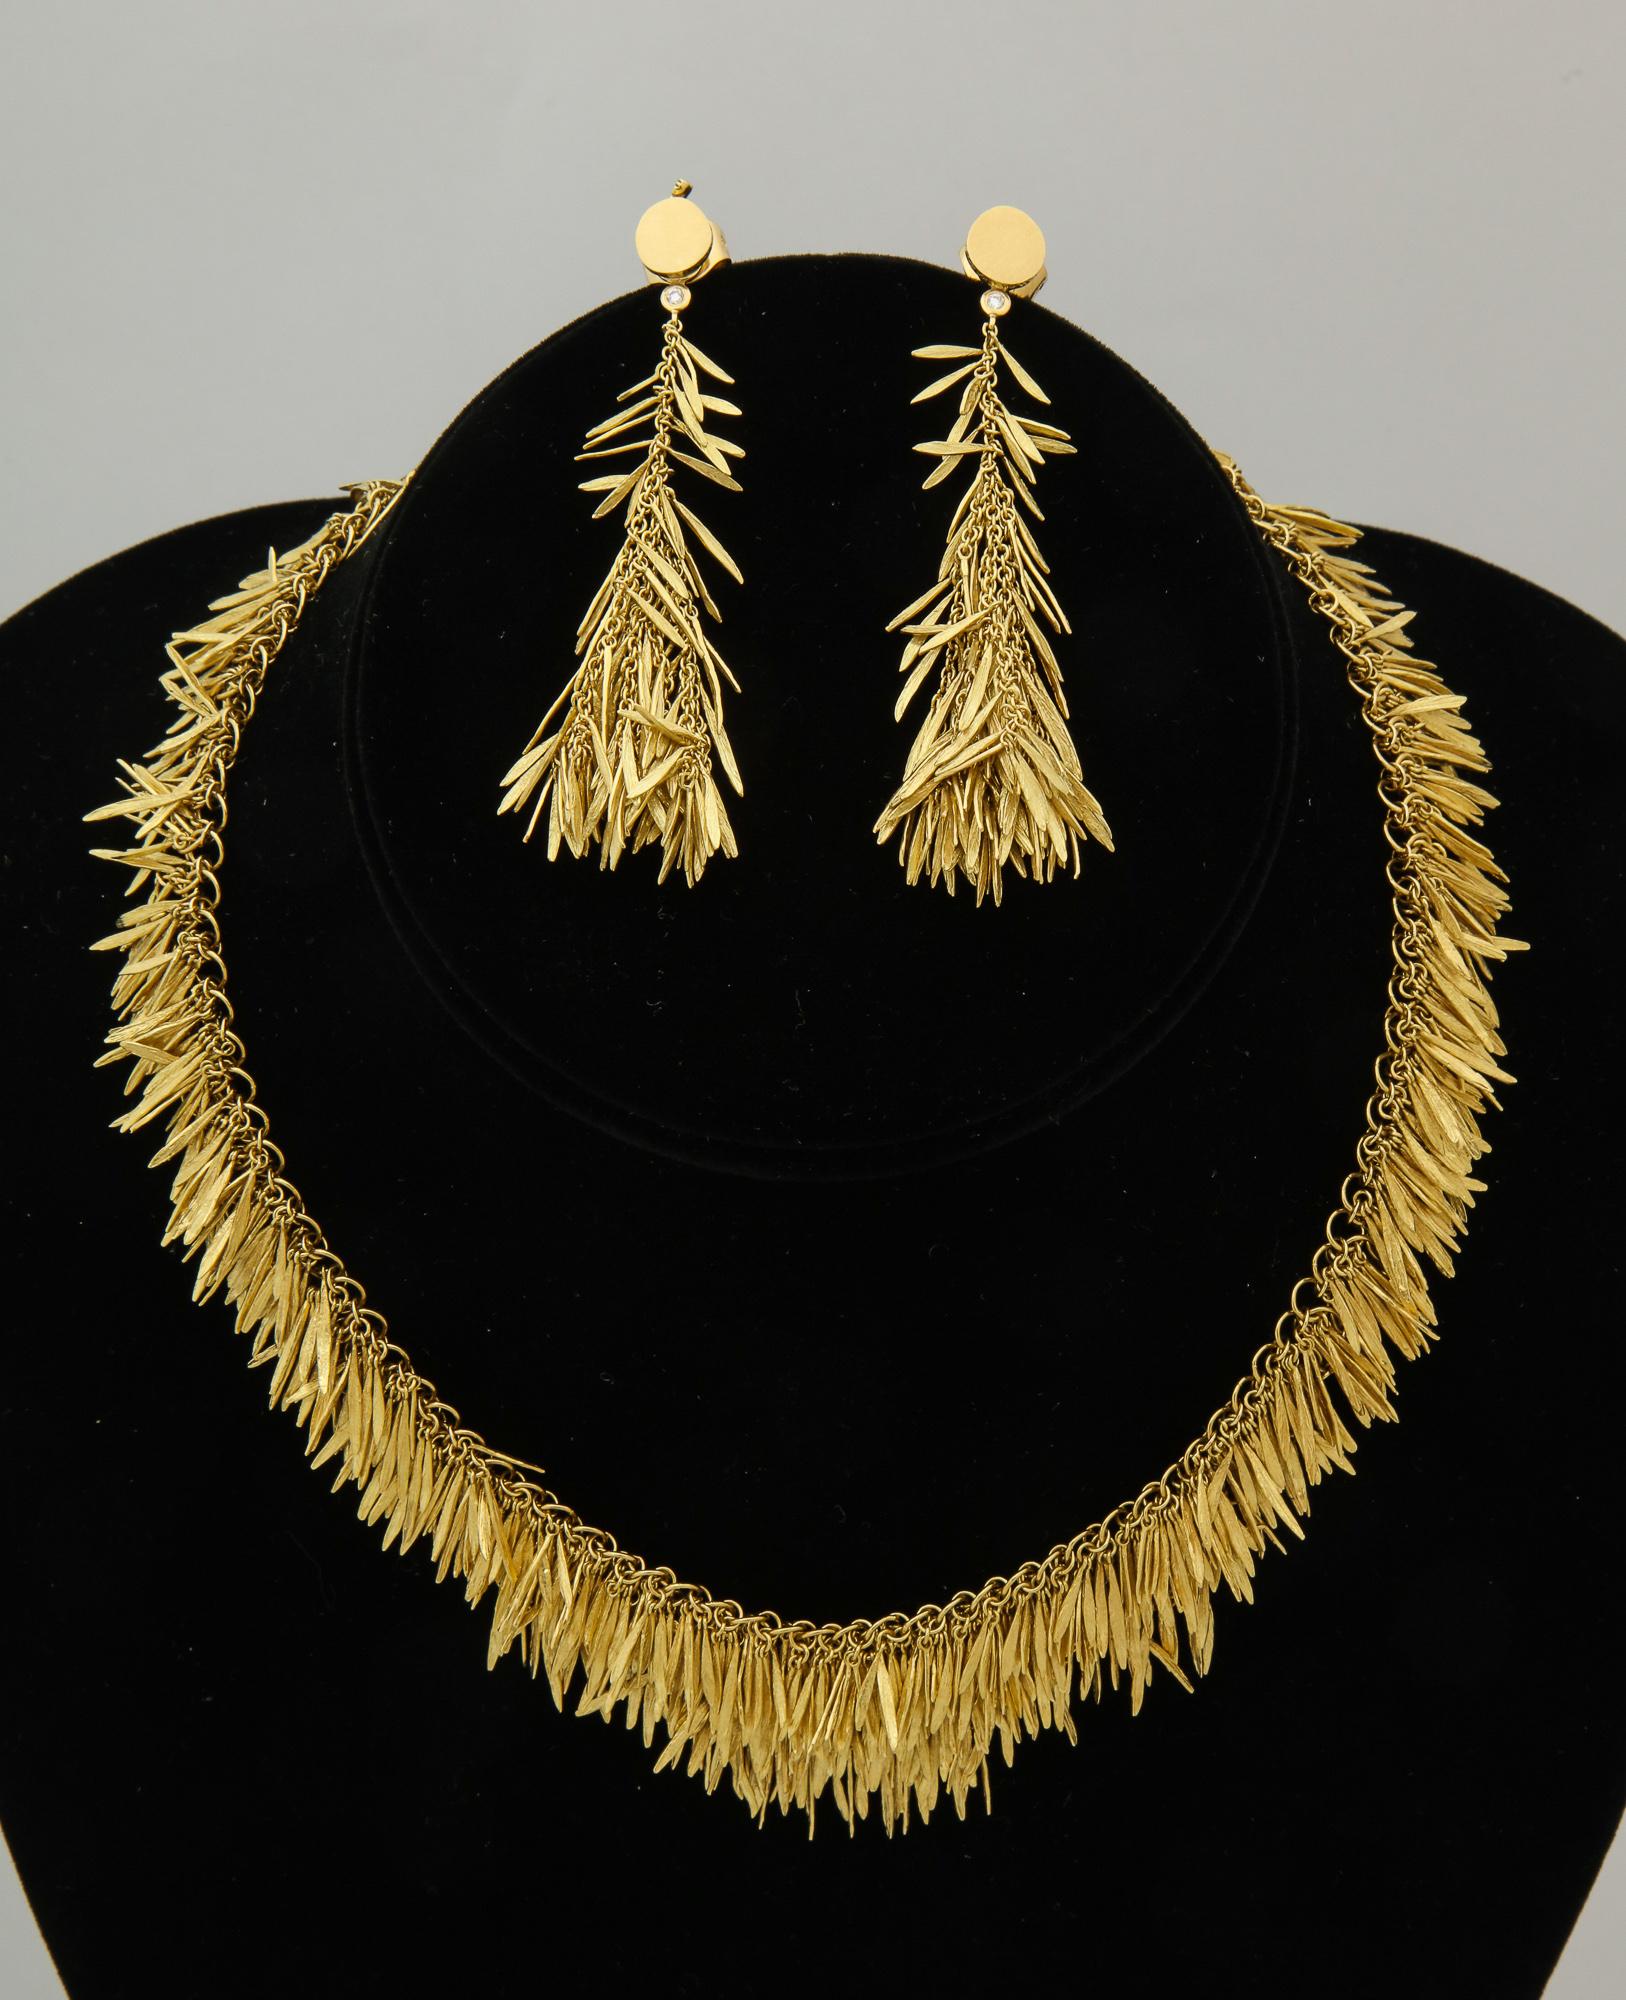 One Ladies 18kt Individually Hand Carved Flexible And Articulated Suite Composed Of One Pair Of Handmade Moveable Dangle Earrings For Pierced Ears Only.Measurement Of Earrings= 2.5 inches Long And .50 Inches At Widest Point. En Suite Is A Necklace